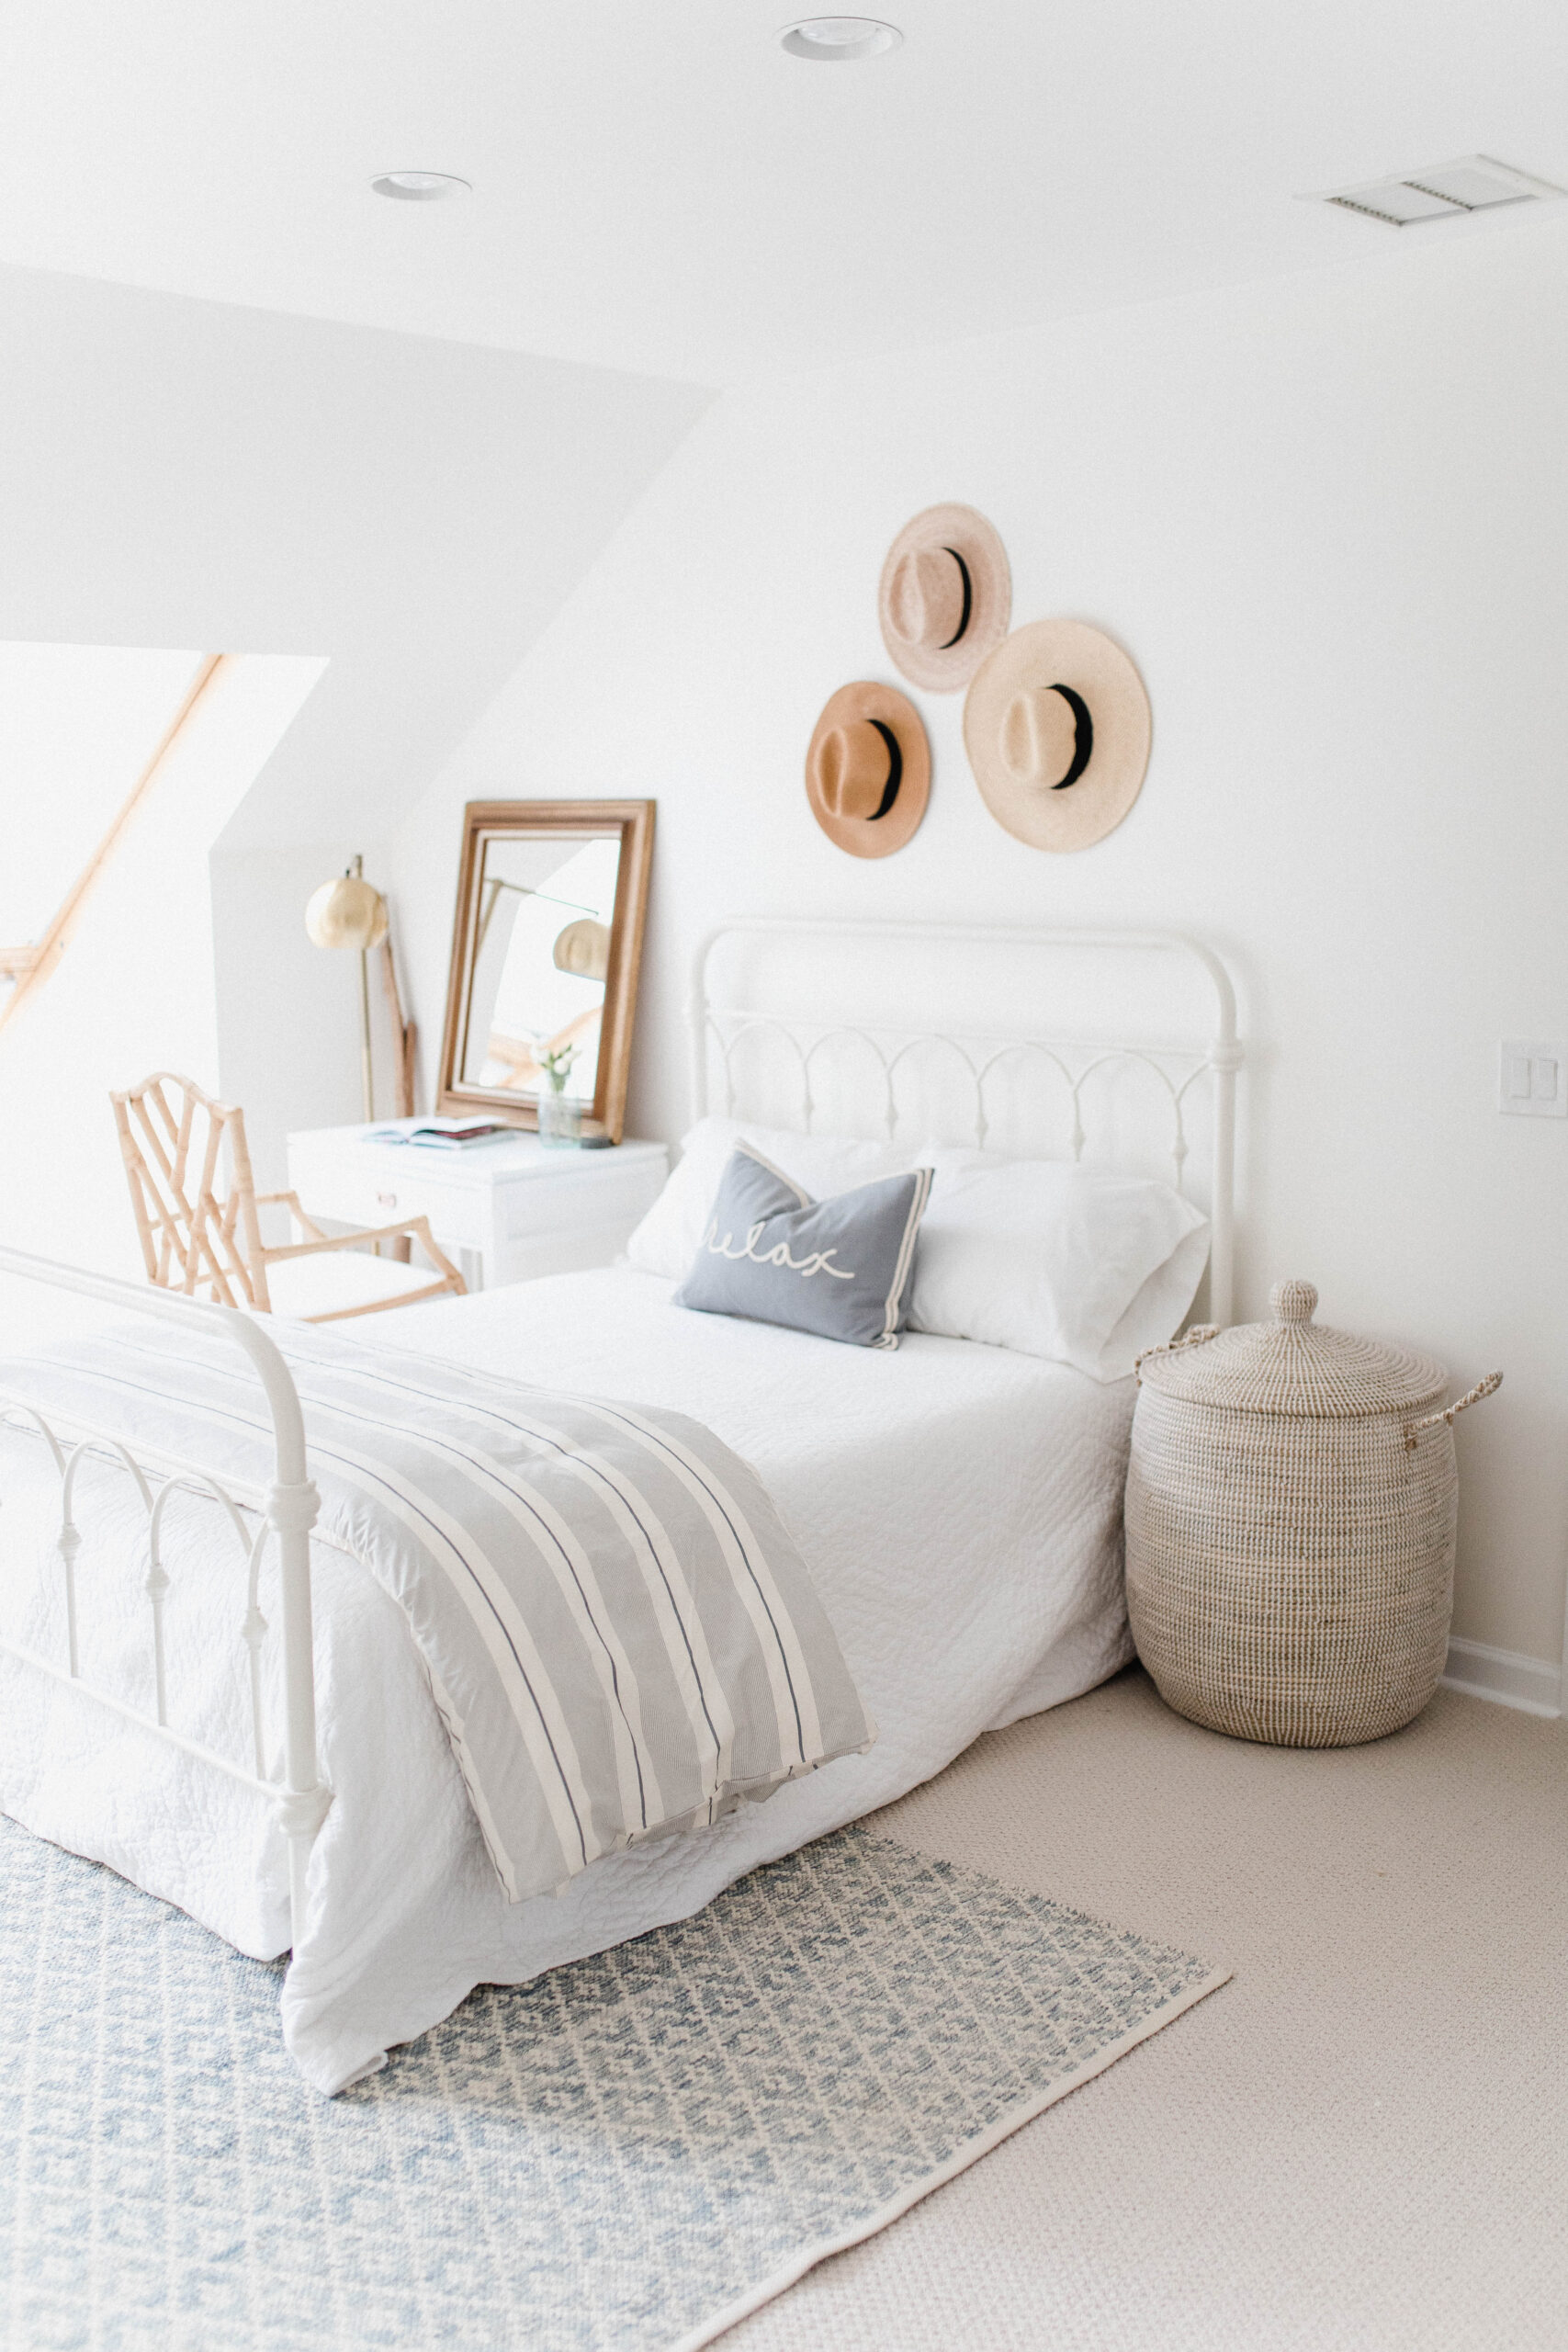 Connecticut life and style blogger Lauren McBride shares a relaxing retreat with her coastal-inspired guest room 